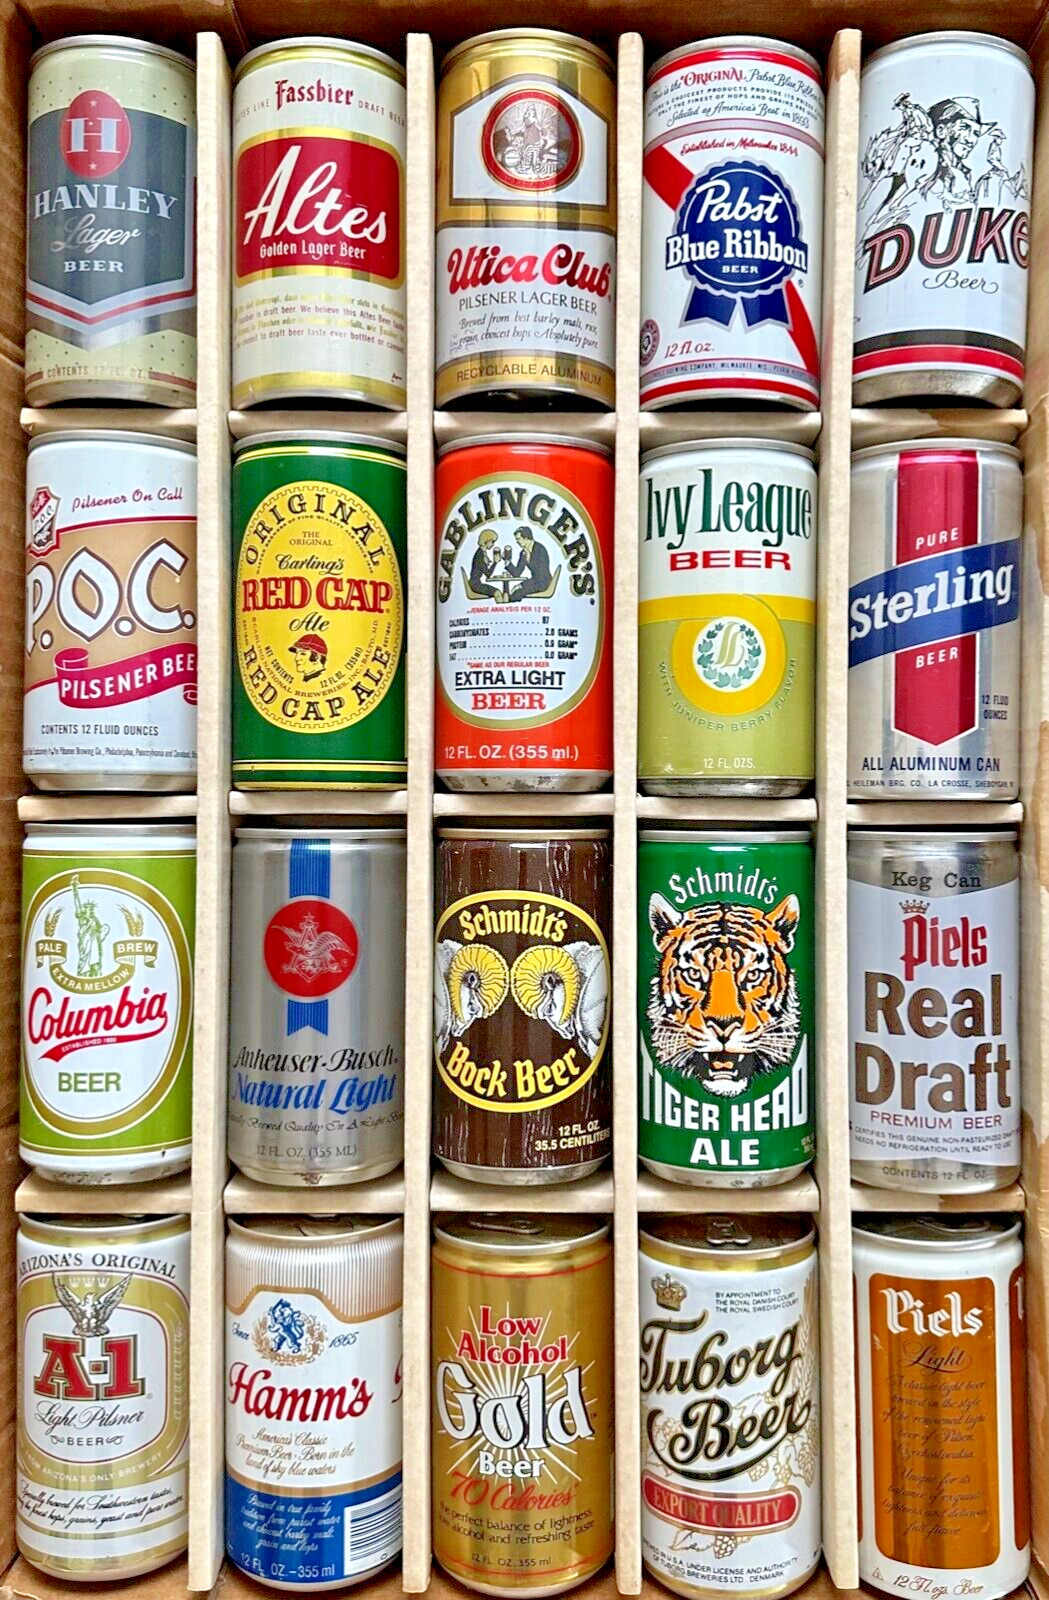 TOUGH Lot Of 20 1970s & 1980s Beer Cans Bottom Opened EMPTY beer cans